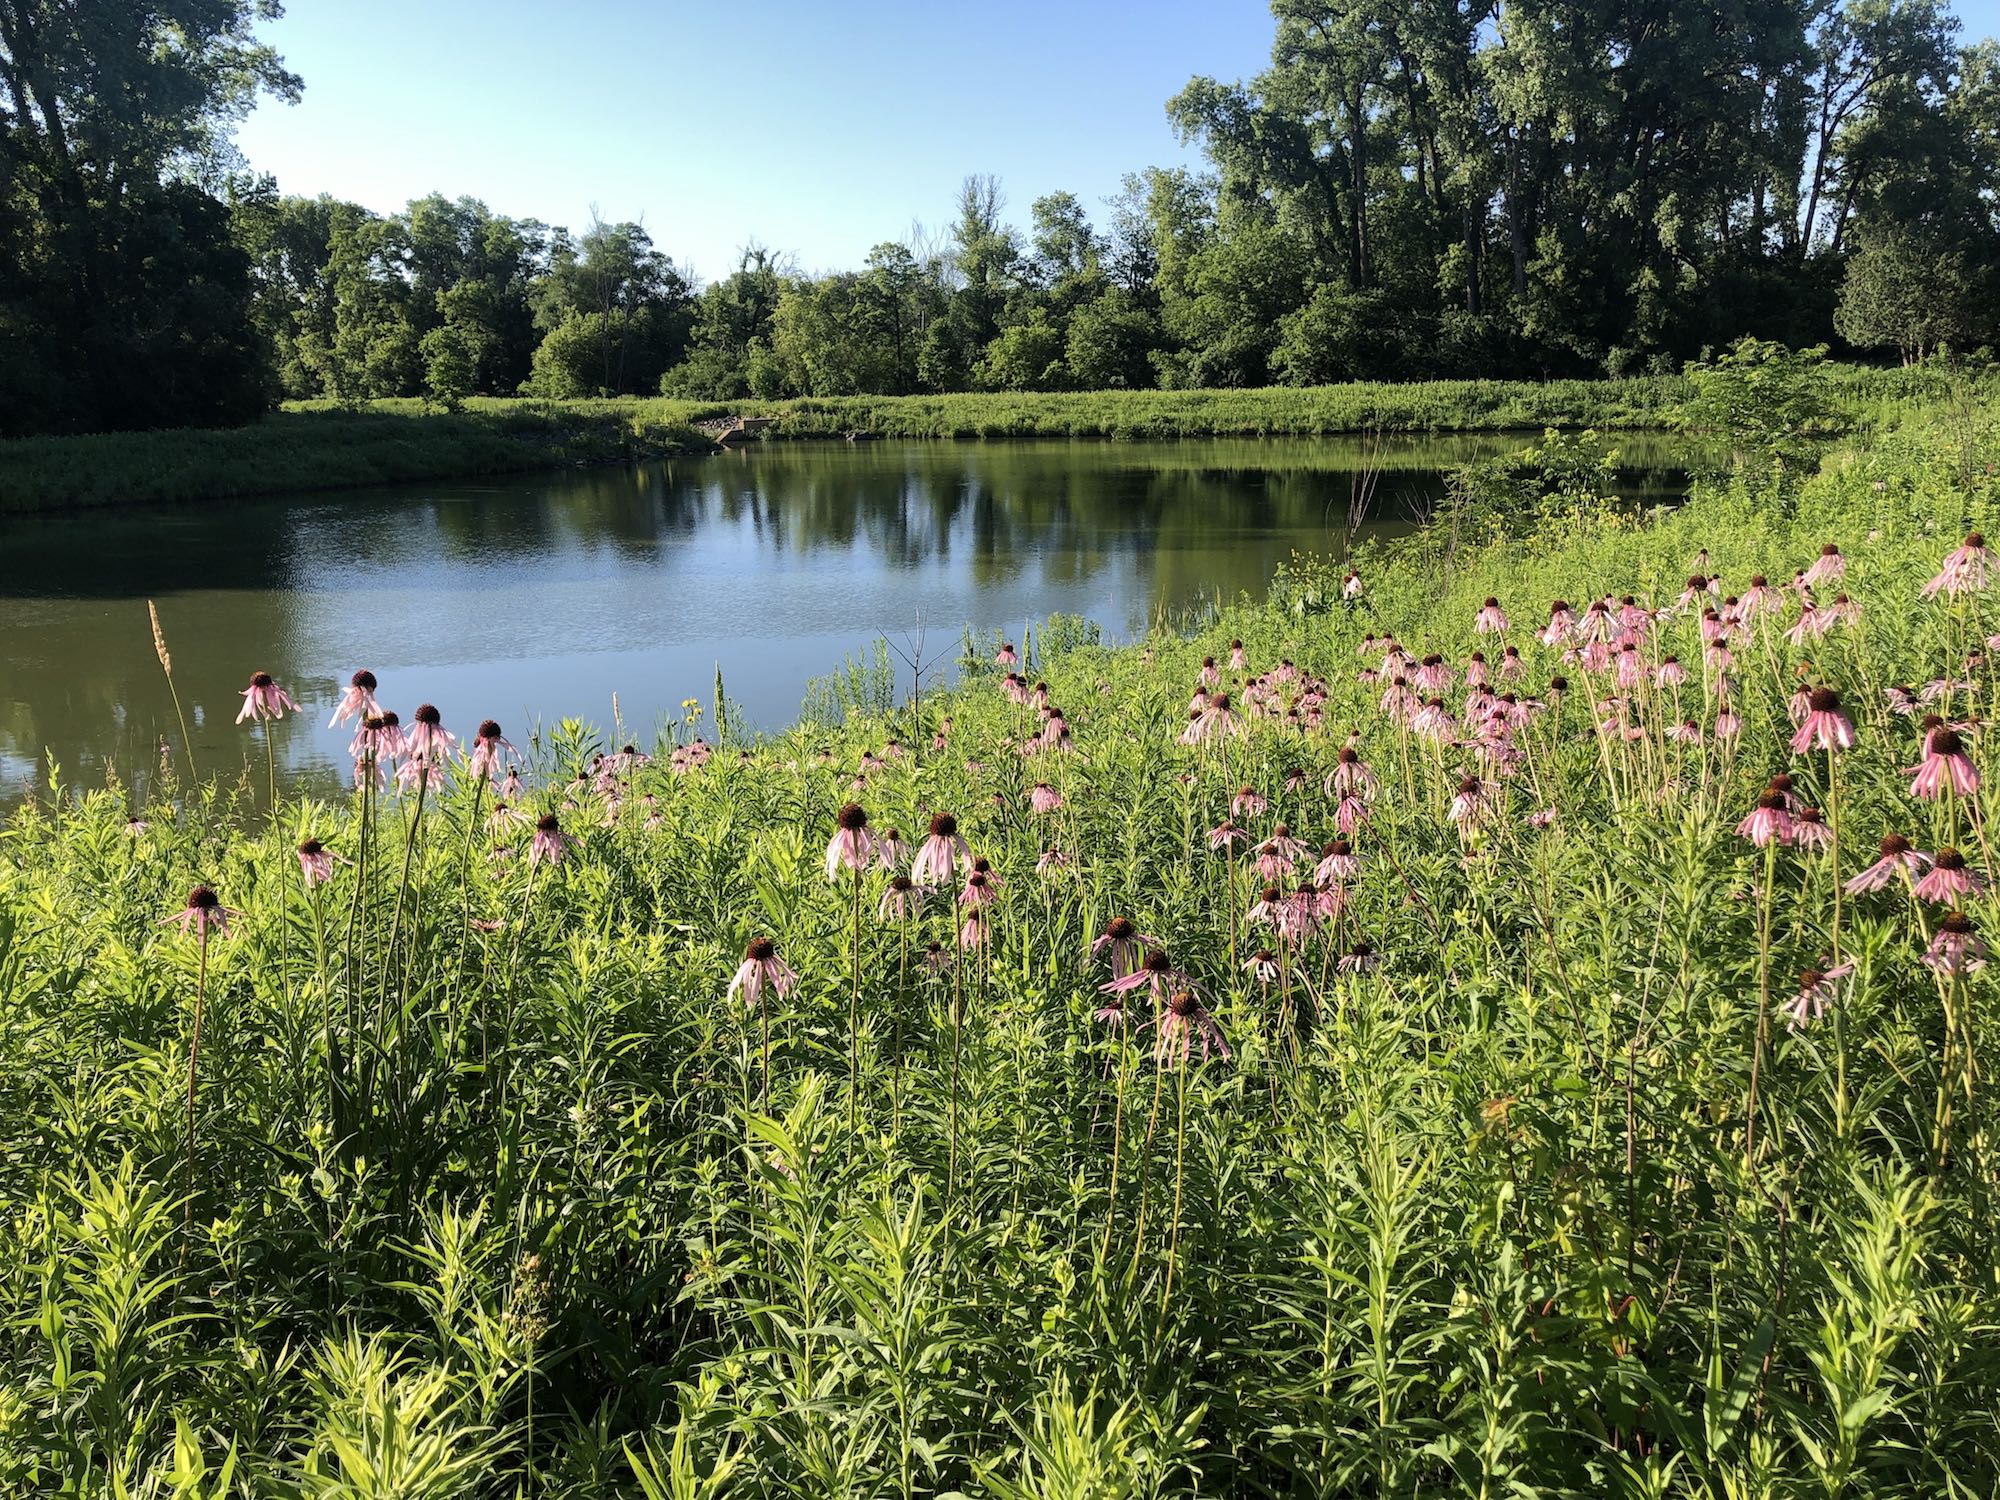 Pale purple coneflower on bank of Retaining Pond on corner of Nakoma Road and Manitou Way on June 22, 2021.